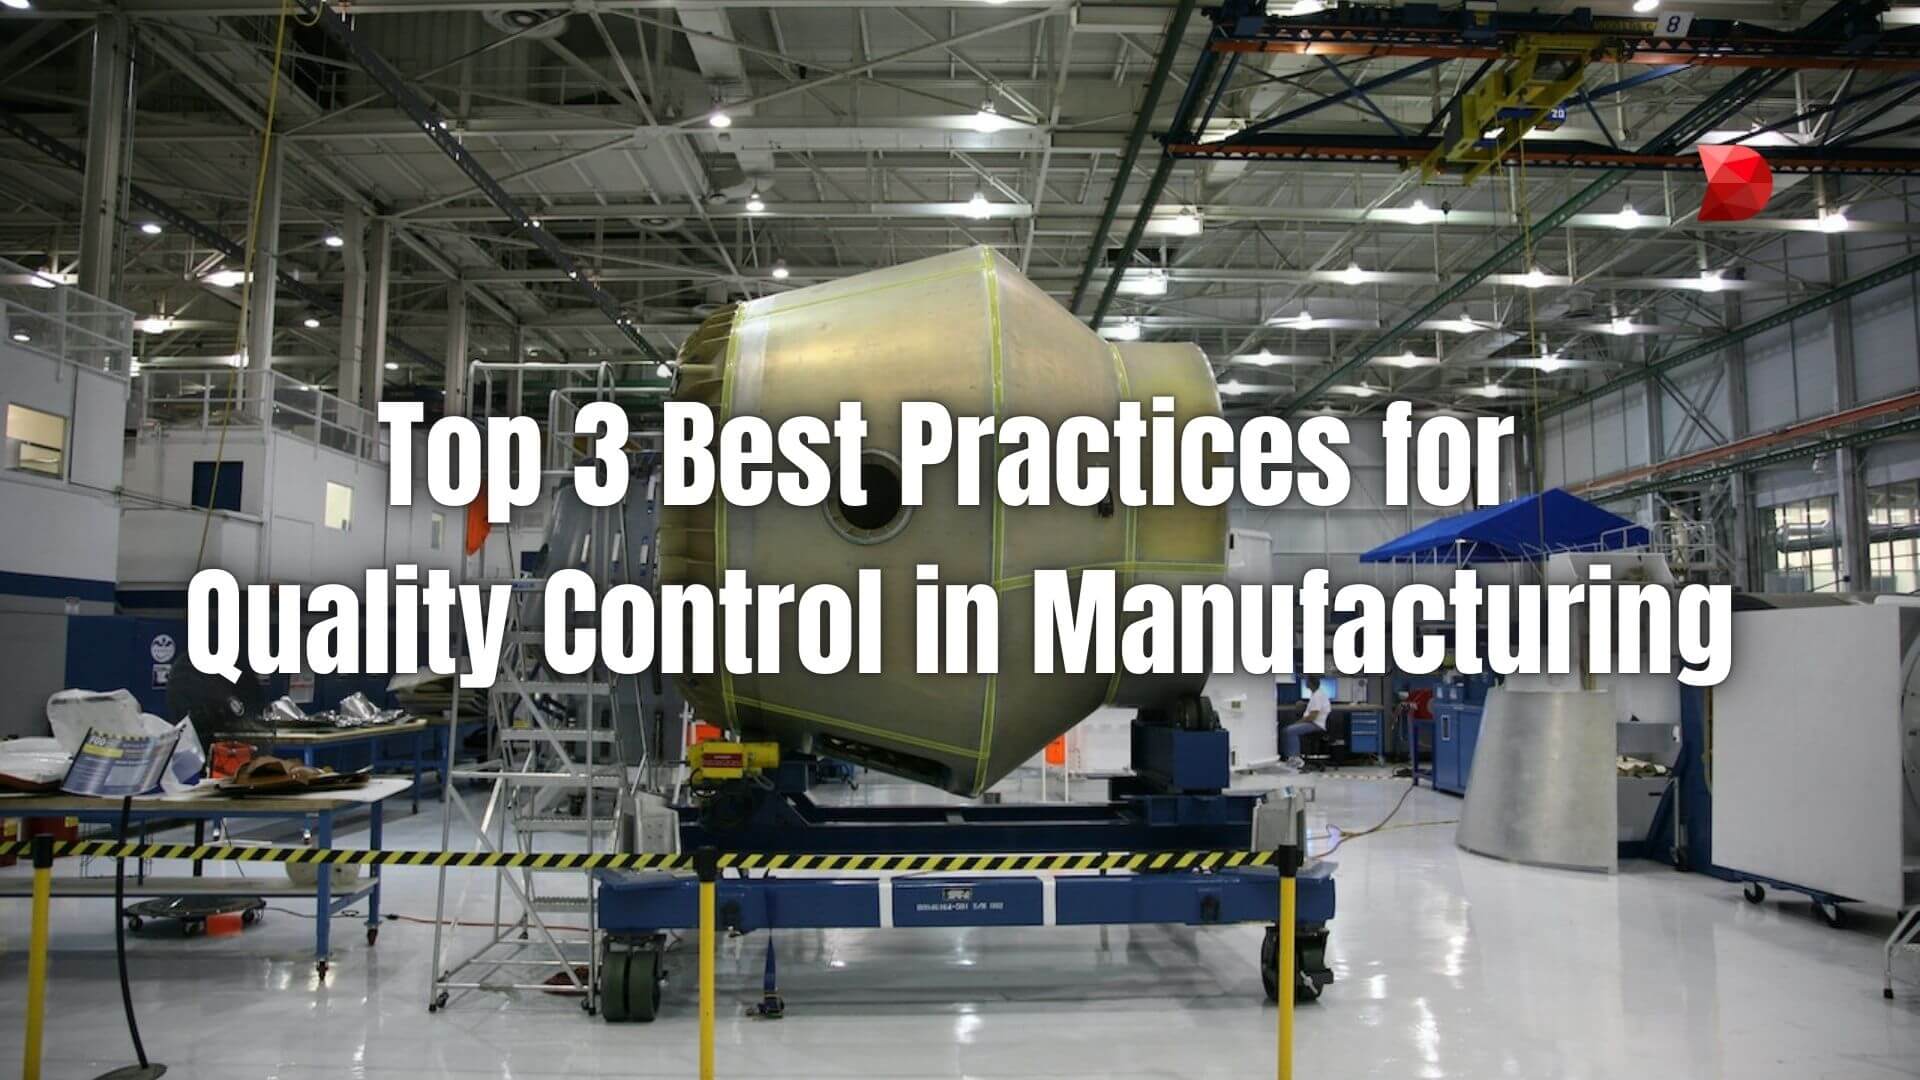 Top 3 Best Practices for Quality Control in Manufacturing